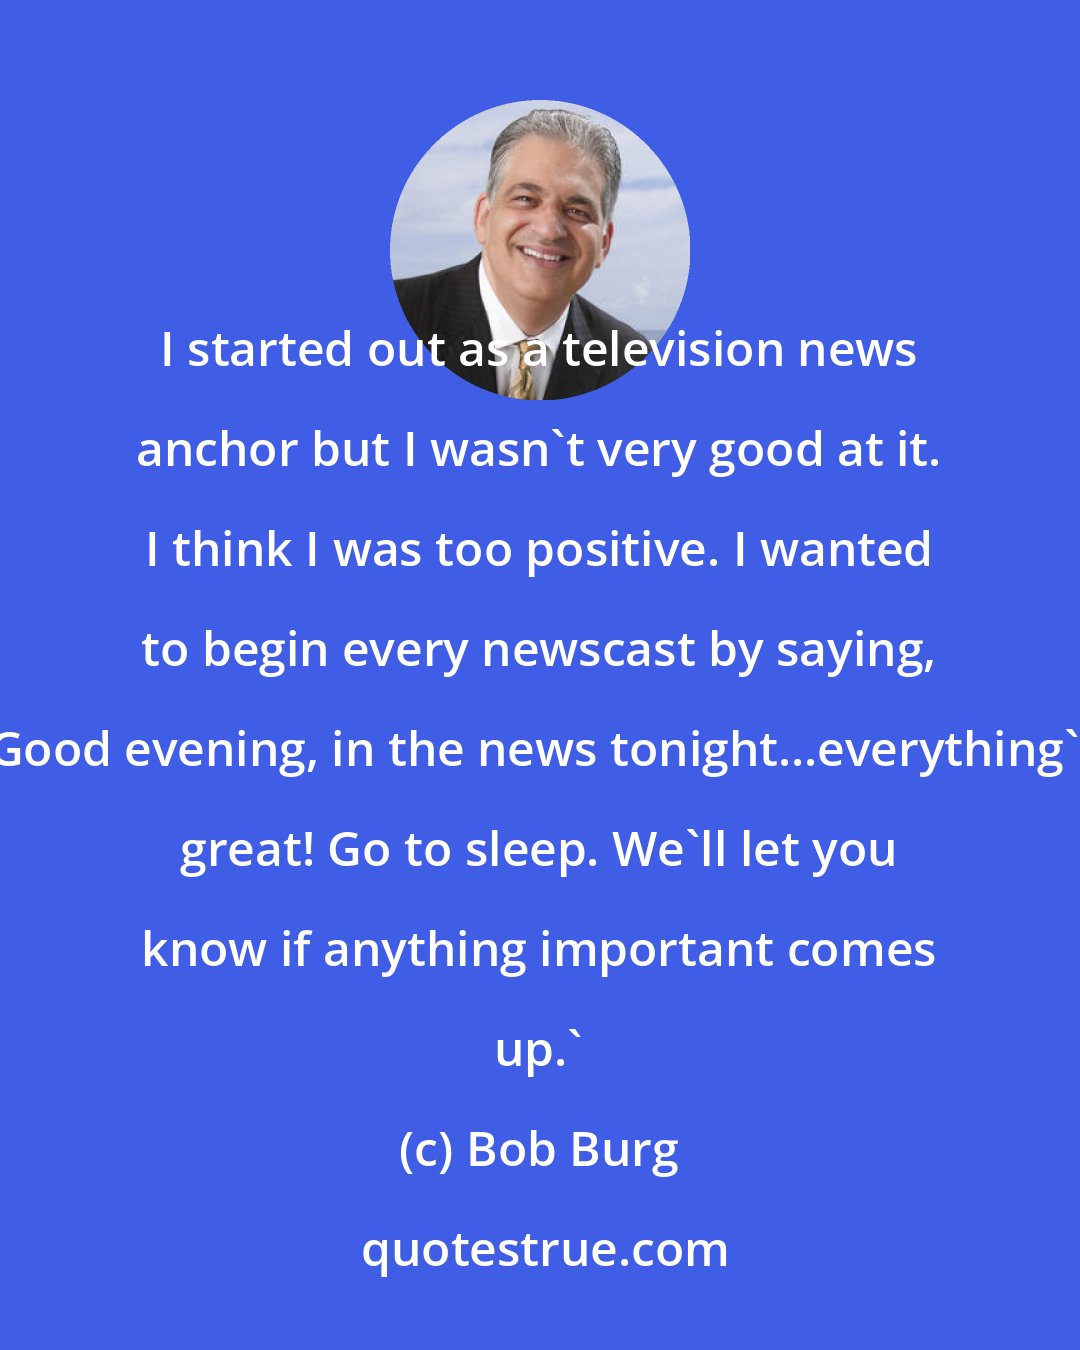 Bob Burg: I started out as a television news anchor but I wasn't very good at it. I think I was too positive. I wanted to begin every newscast by saying, 'Good evening, in the news tonight...everything's great! Go to sleep. We'll let you know if anything important comes up.'